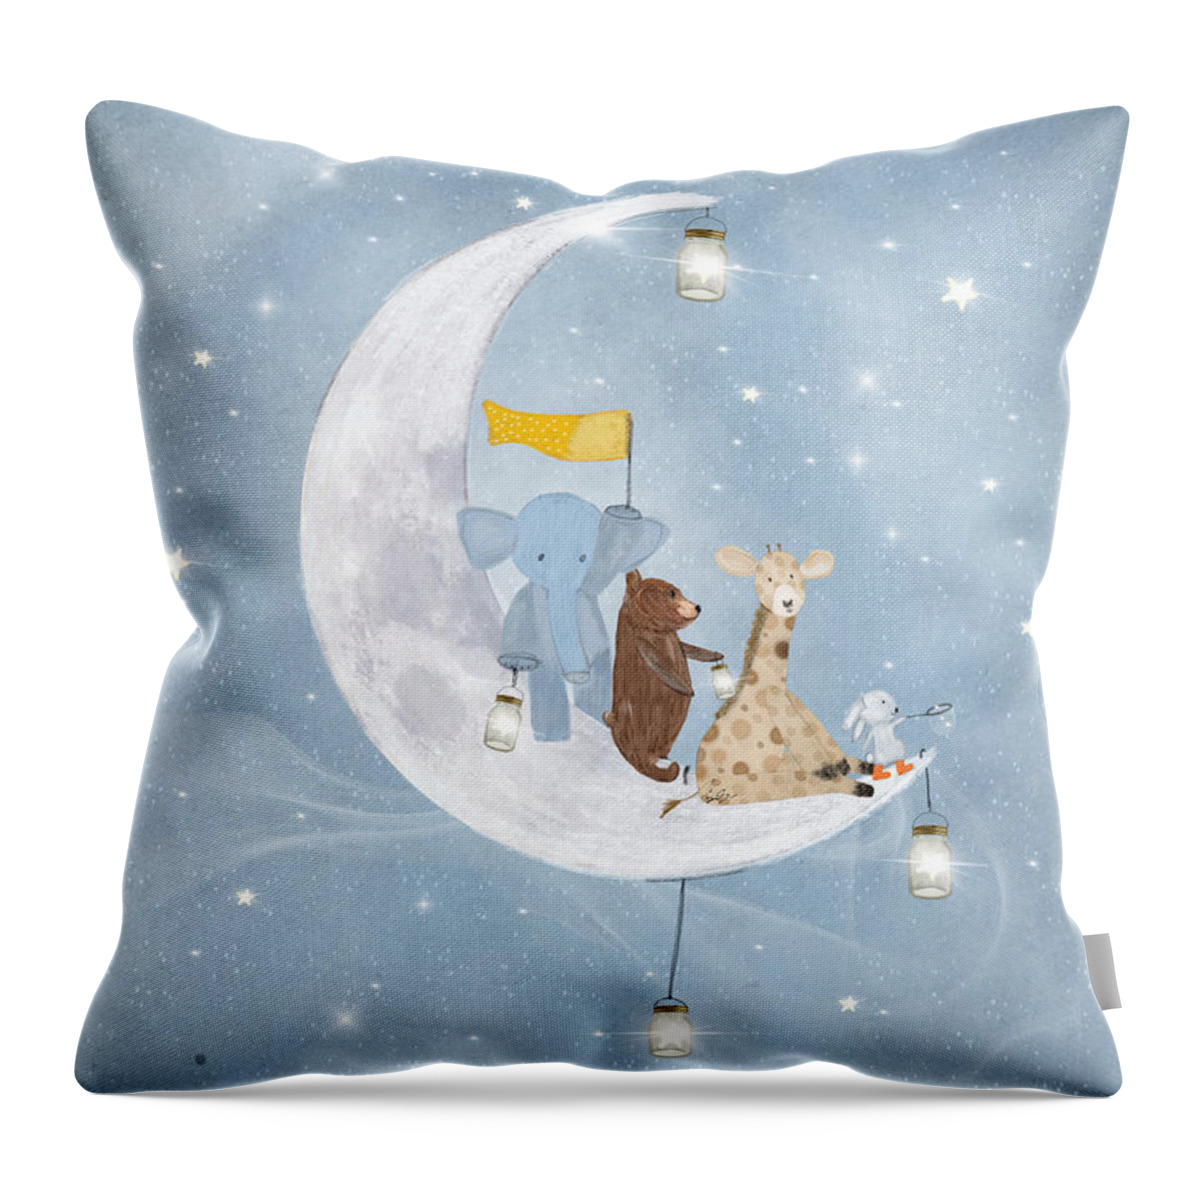 Giraffes Throw Pillow featuring the painting Starlight Wishes With You by Bri Buckley